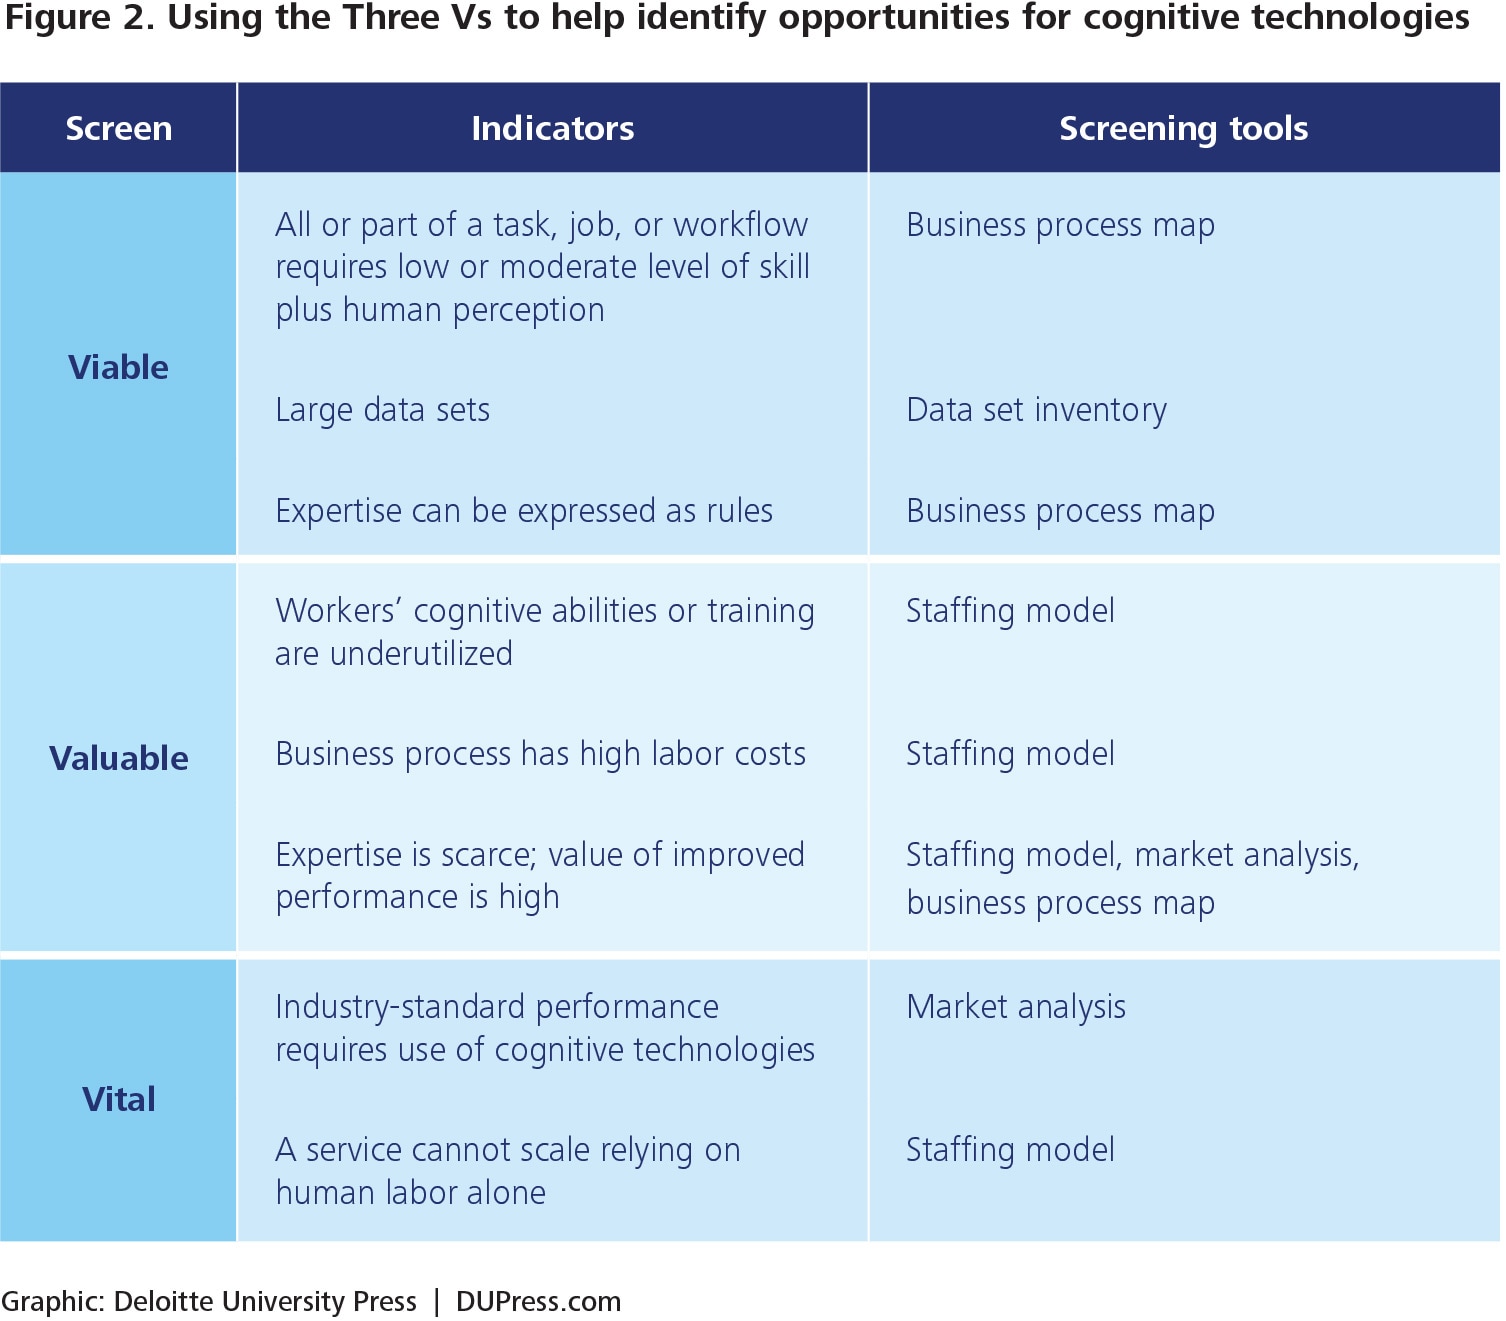 cognitive technologies: the real opportunities for business